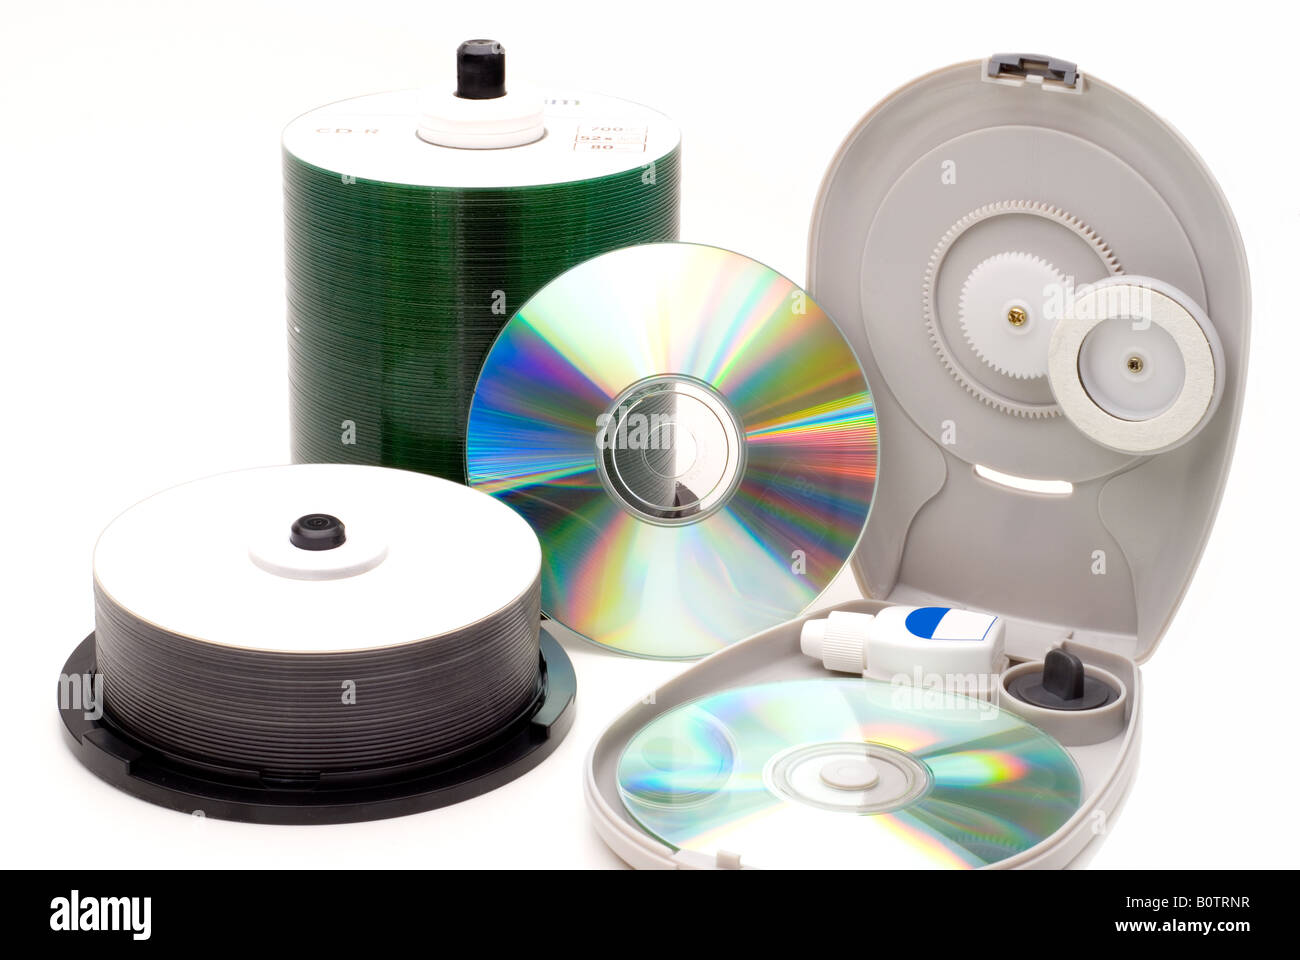 Compact discs and dvd's on white background Stock Photo